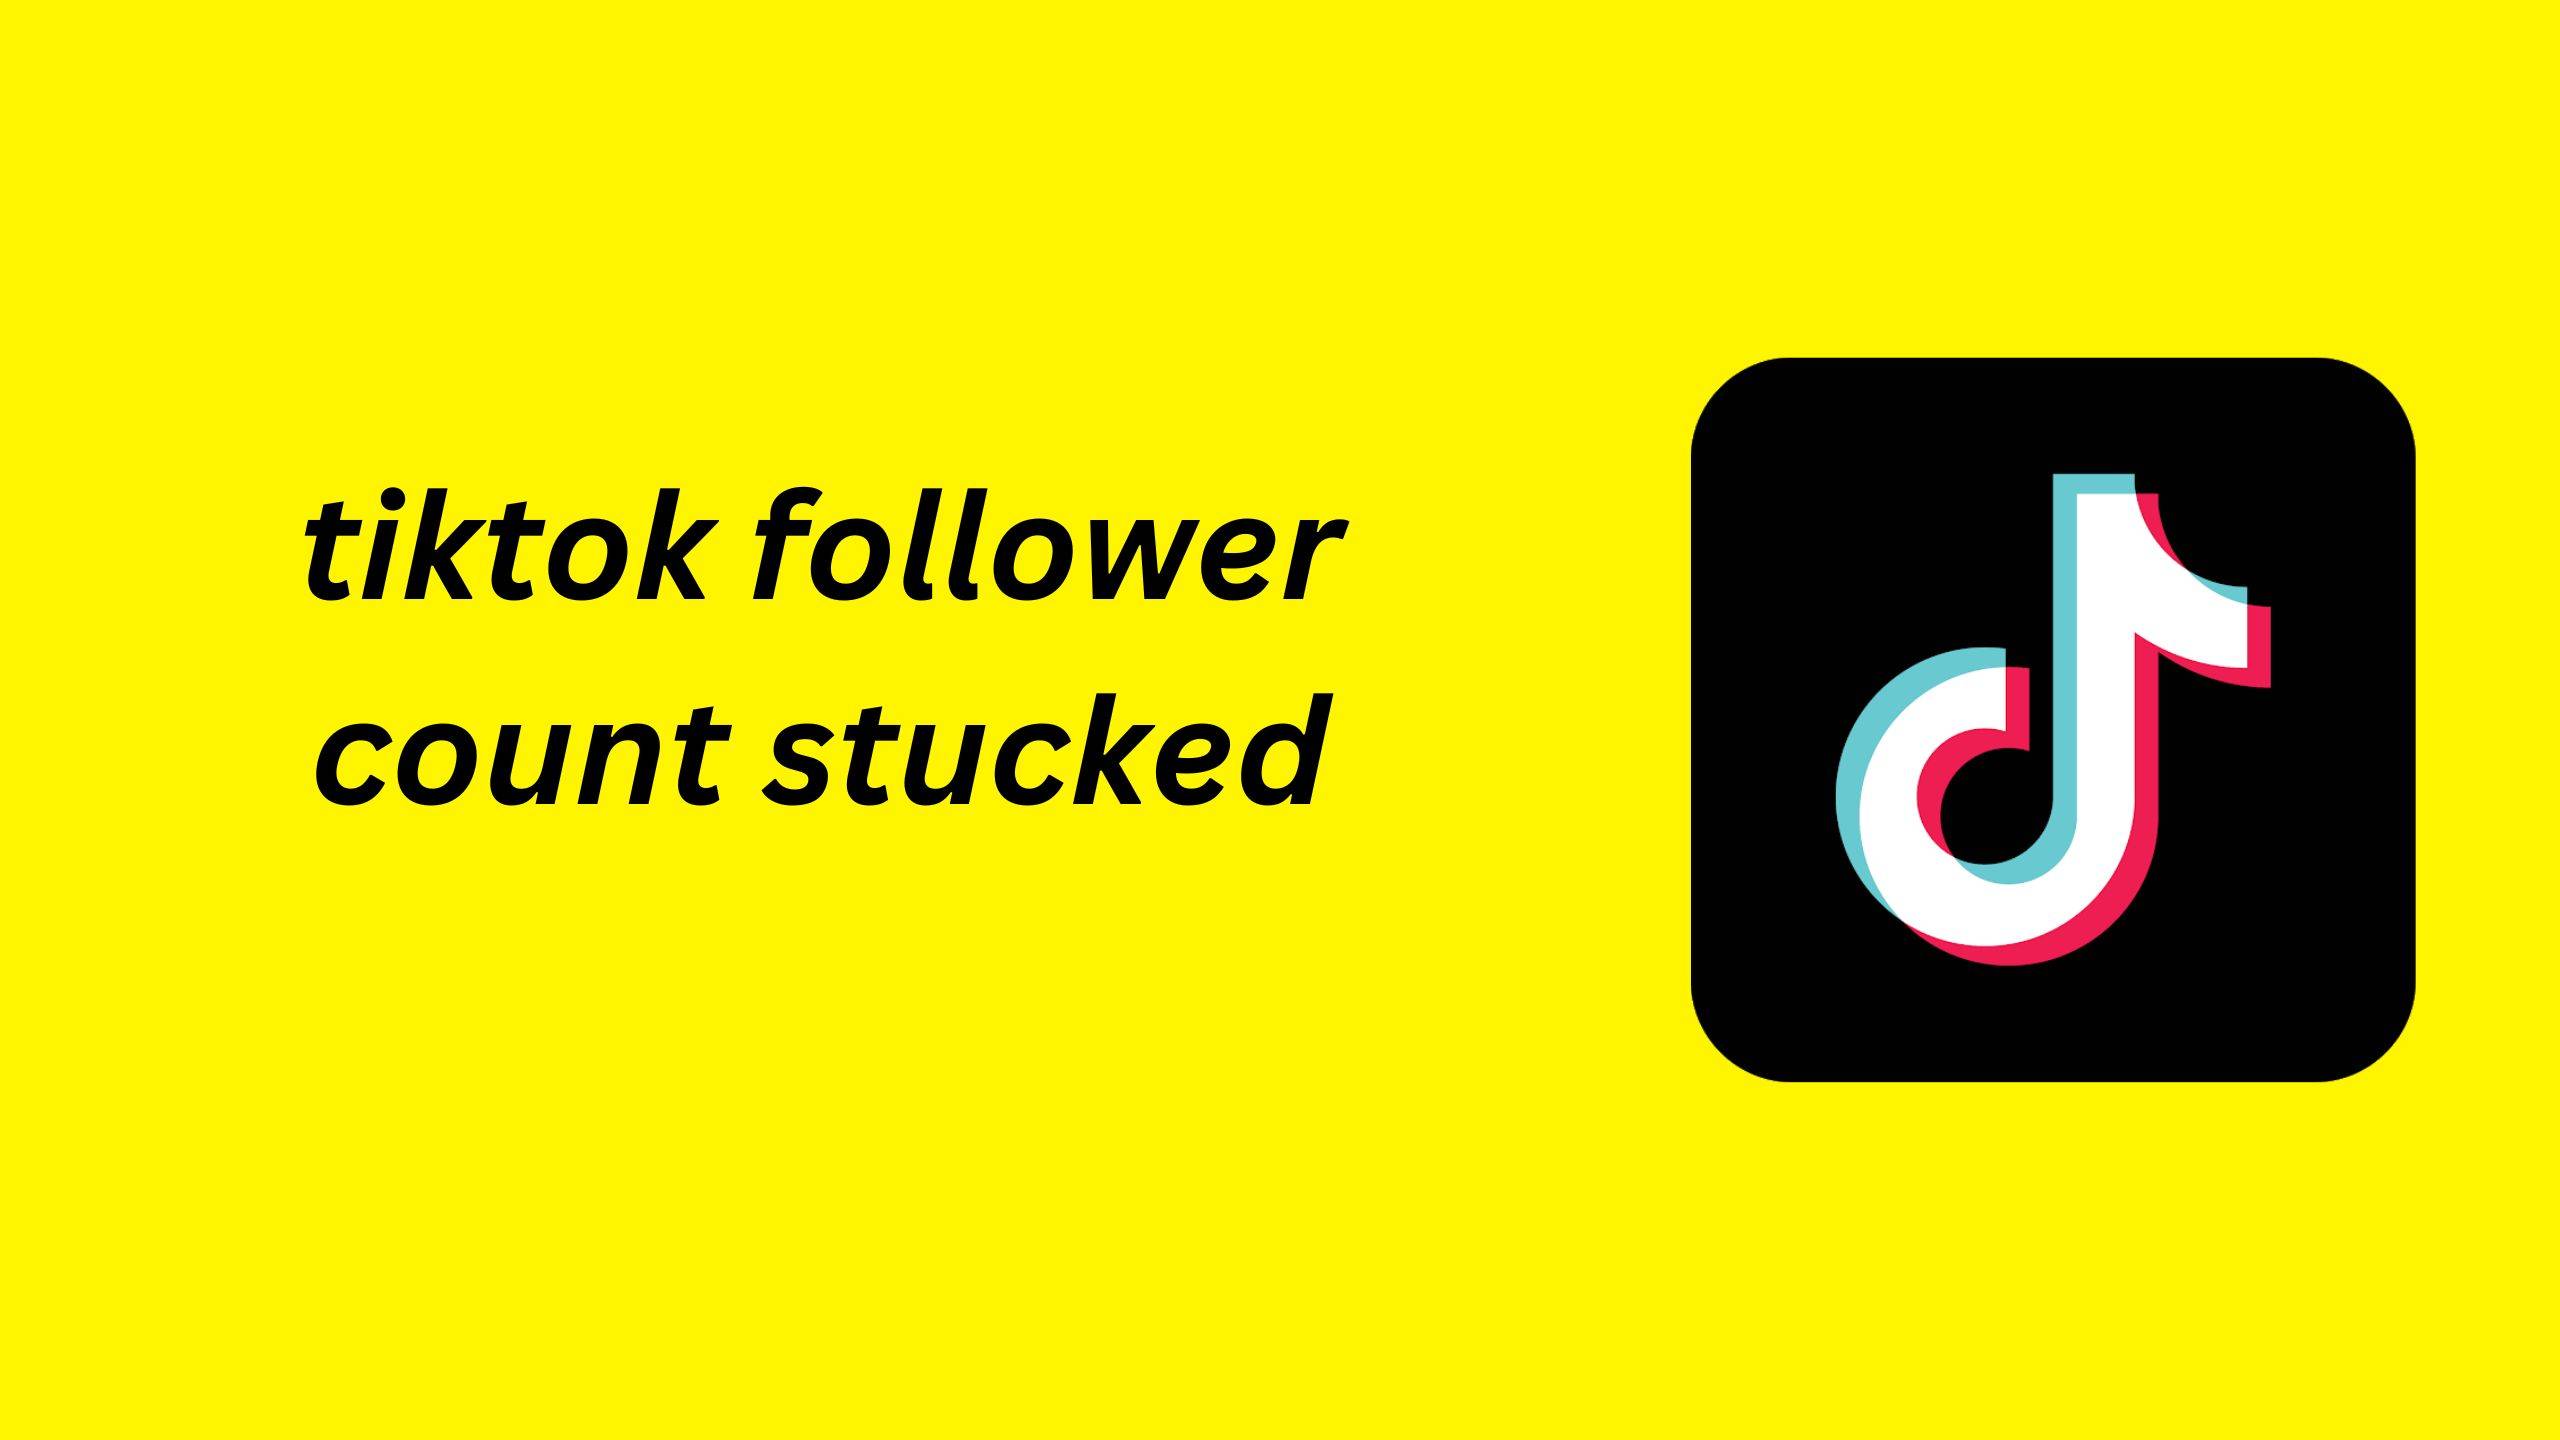 tiktok follower count stuck - here is how you can fix it